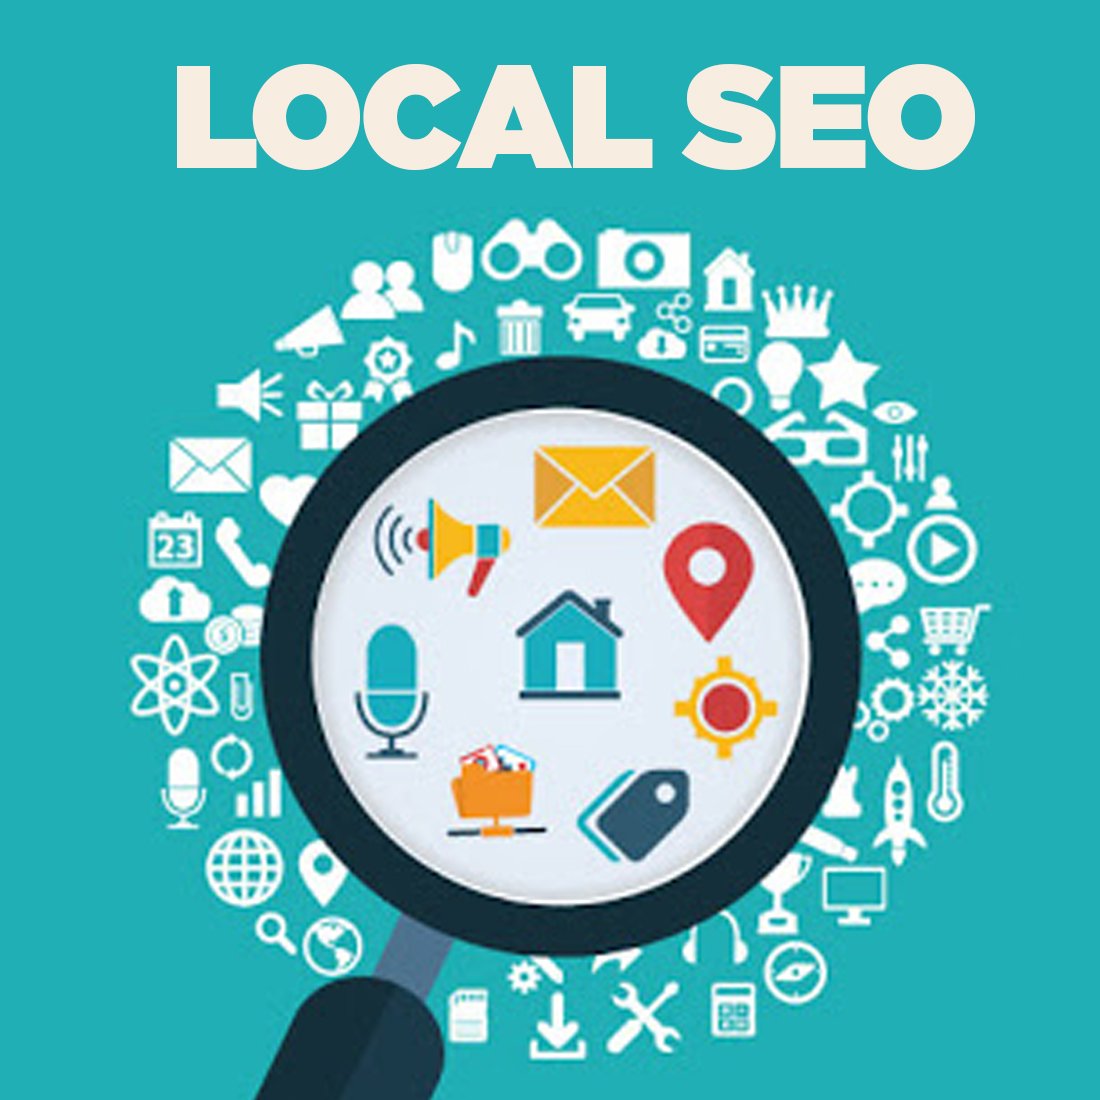 Local SEO Strategy Guide How to Rank Well Locally